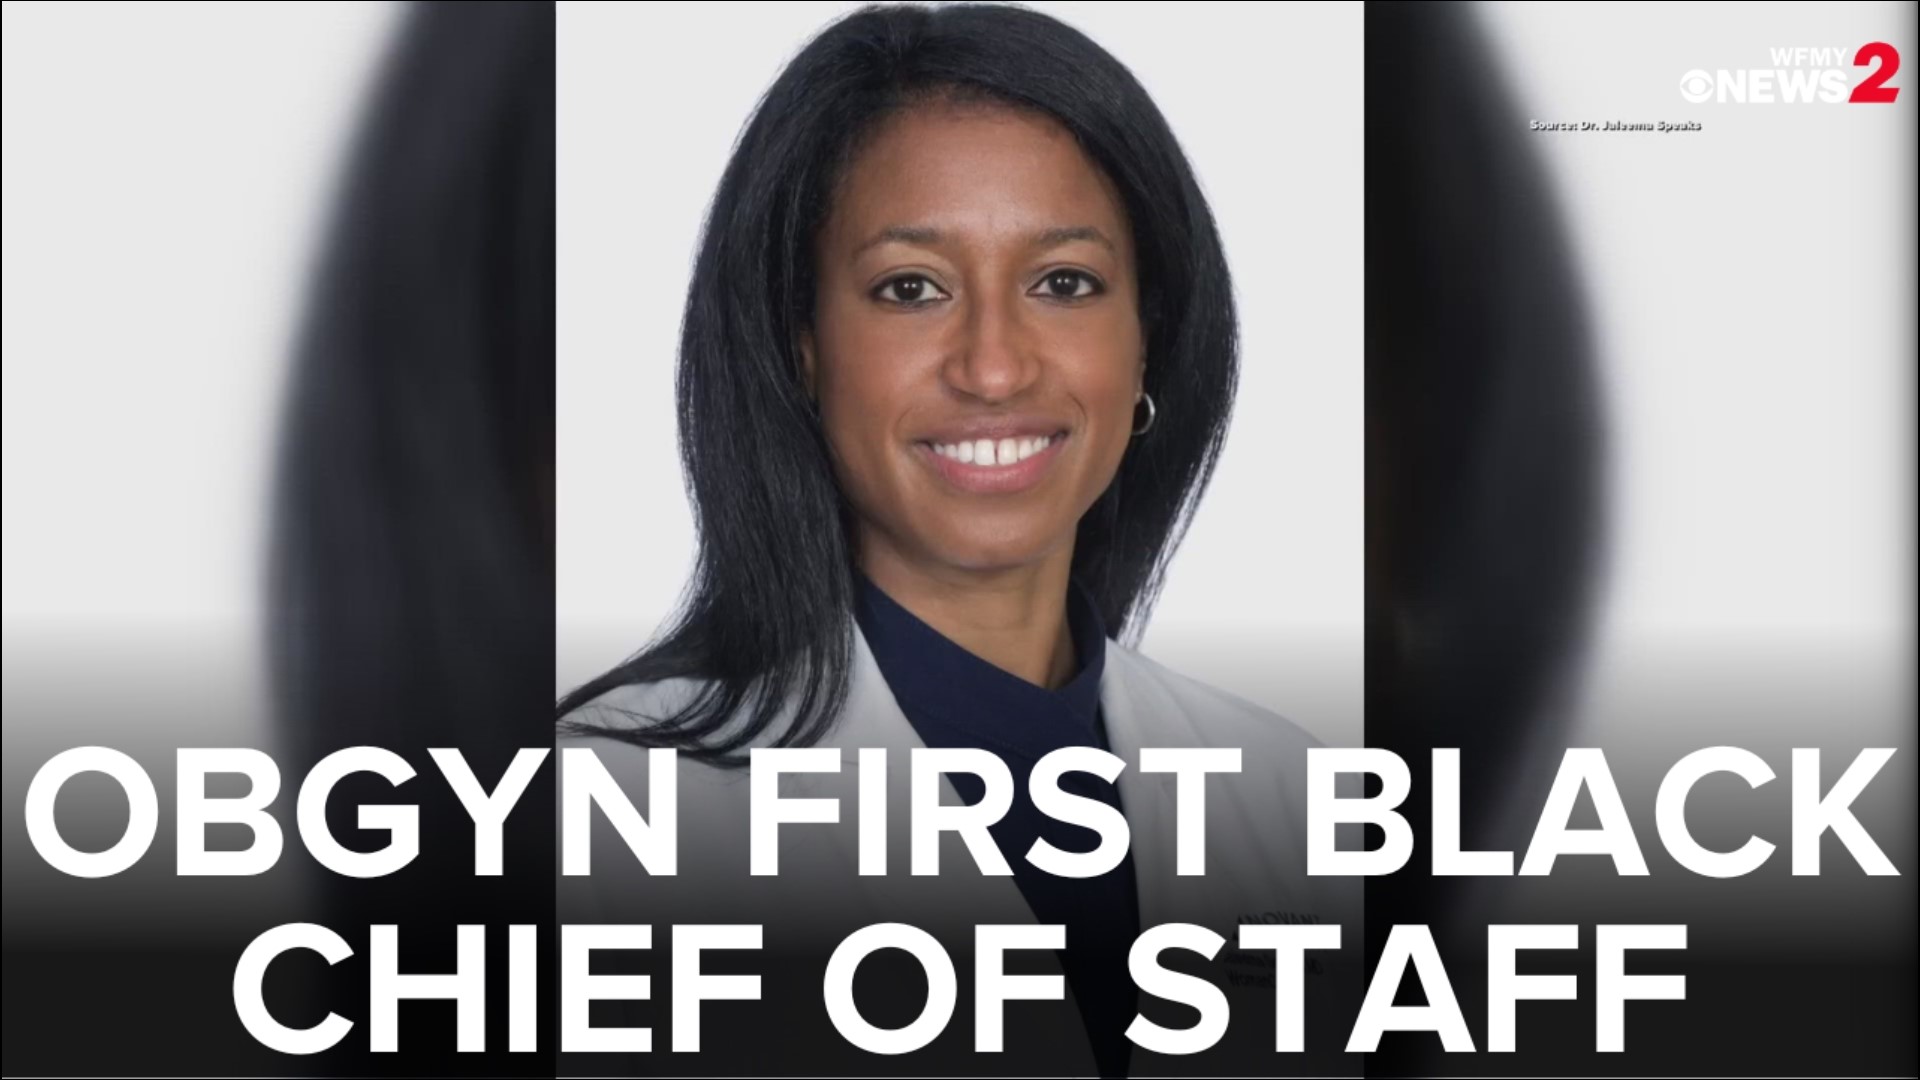 Novant Health OB-GYN Dr. Jaleema Speaks becomes the first Black Chief of Staff at the hospital. She shares her passion for her patients.